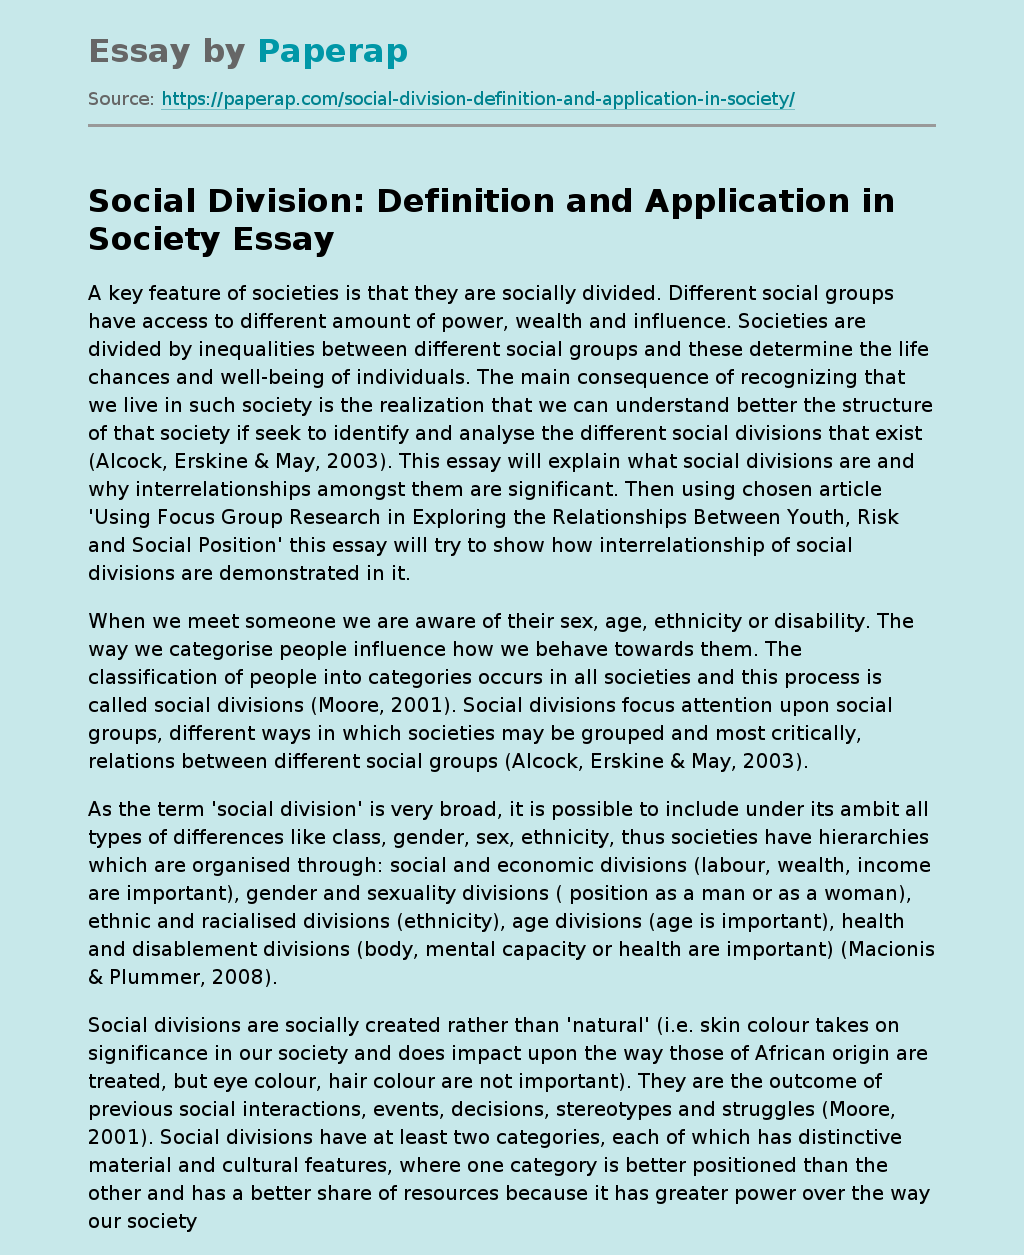 Social Division: Definition and Application in Society